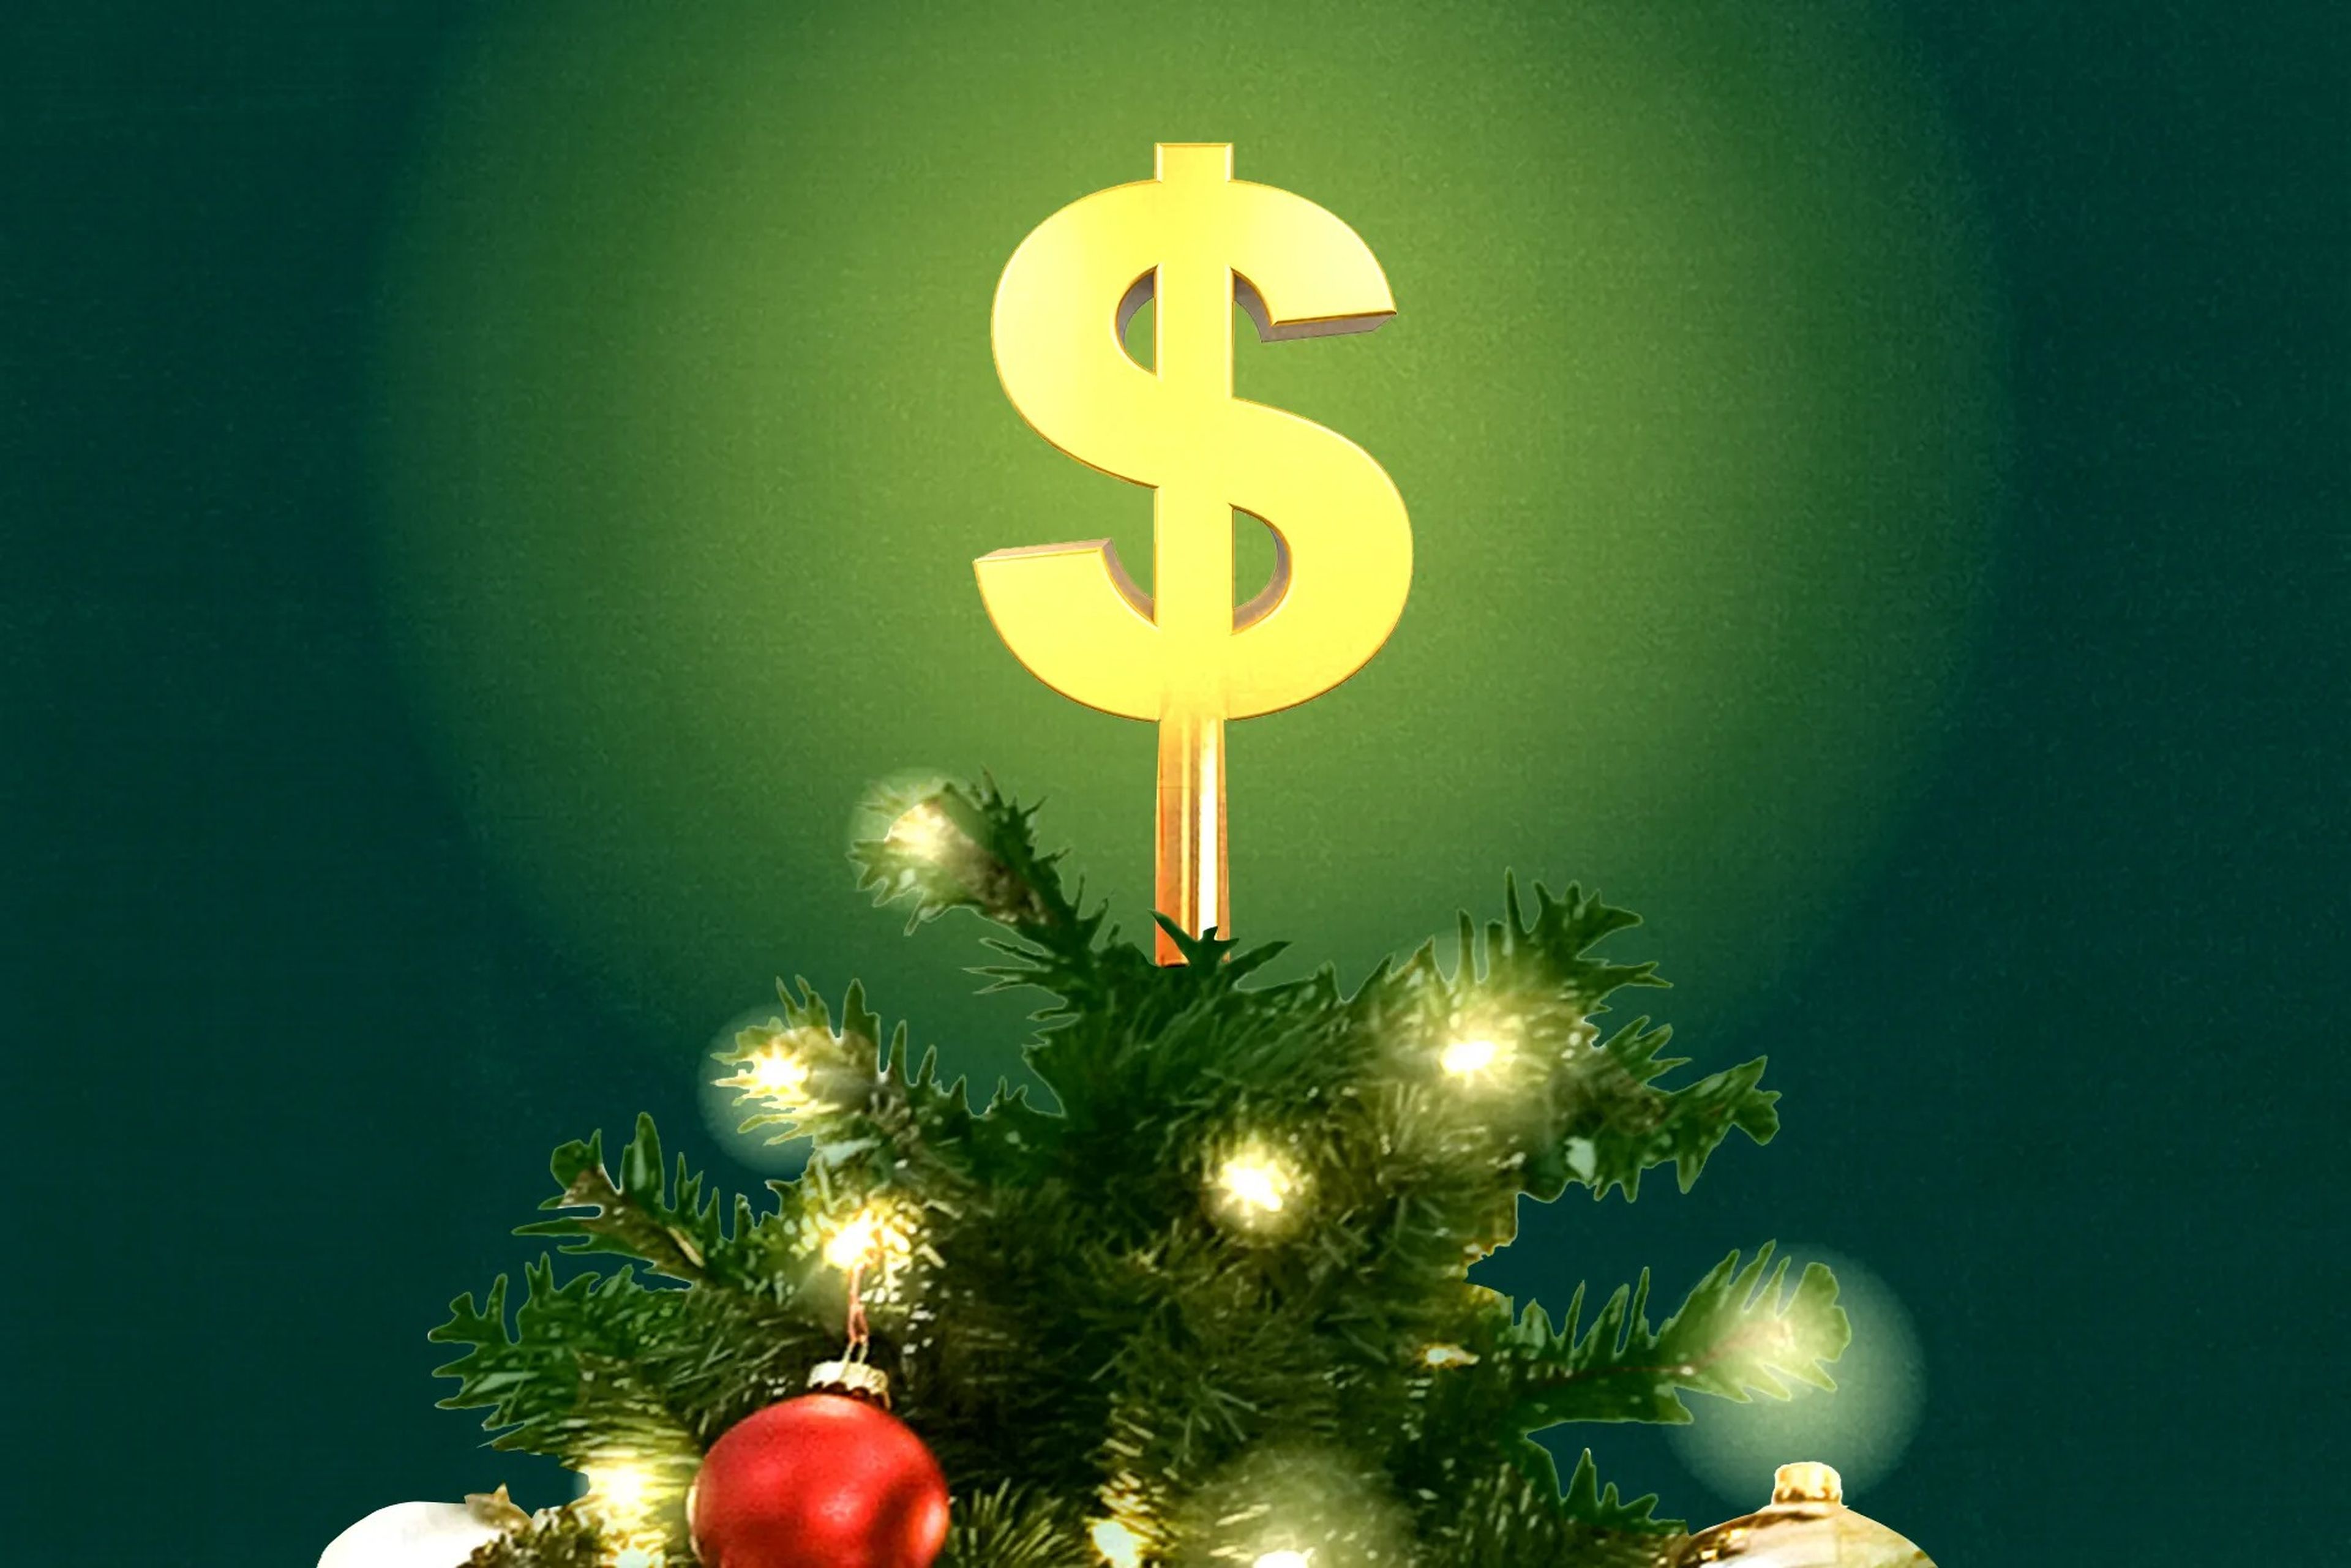 Photo collage of a dollar sign topping a christmas tree.